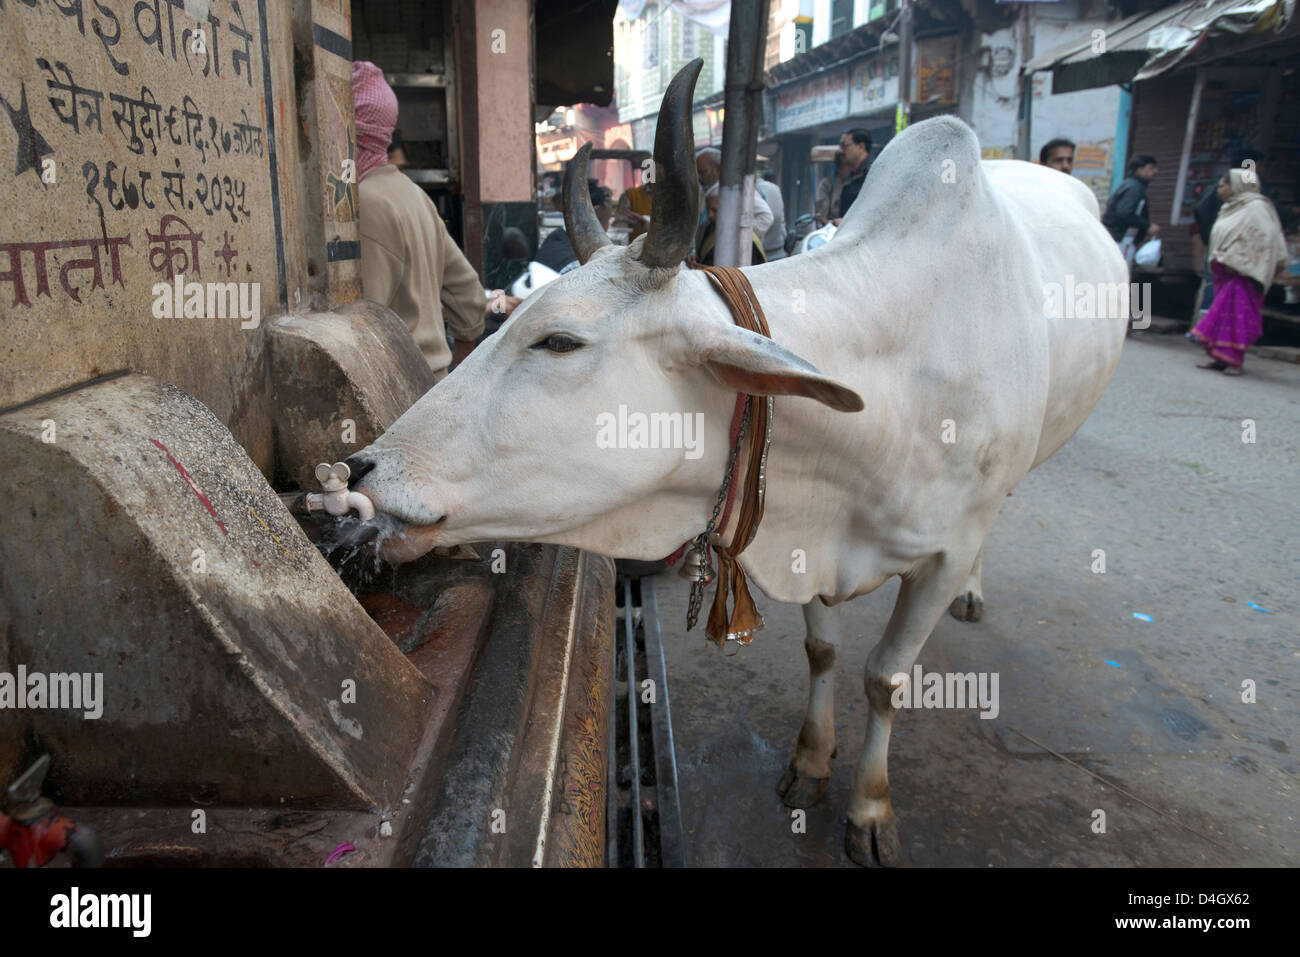 A cow (sacred to Hindus) takes a drink from a public tap in Mathura, West Uttar Pradesh, India Stock Photo